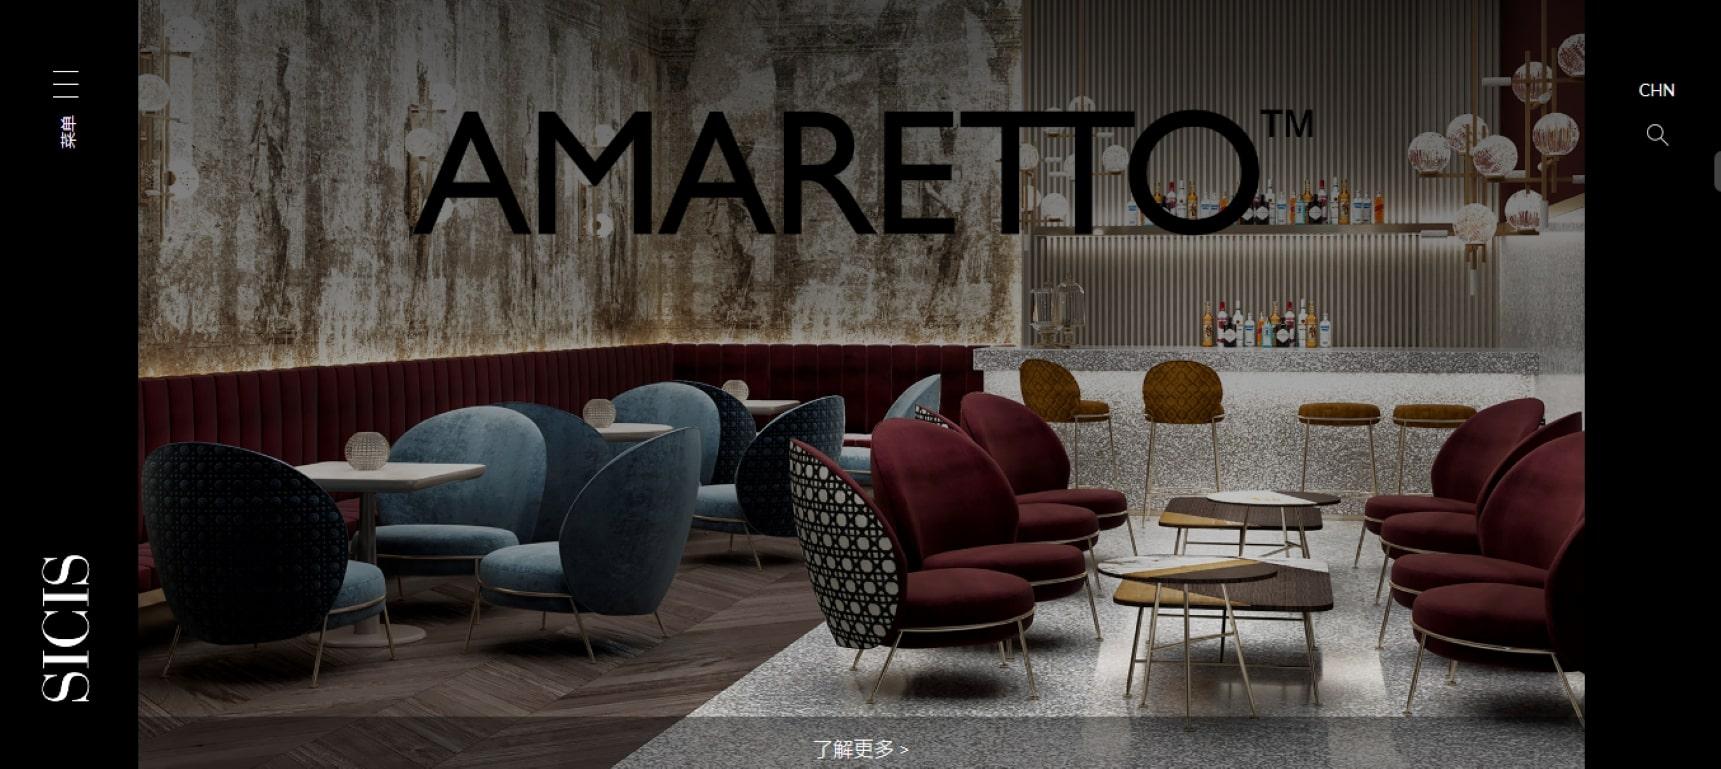 Other Fantastic Chair Amaretto Collection Available in Different Colors For Sale